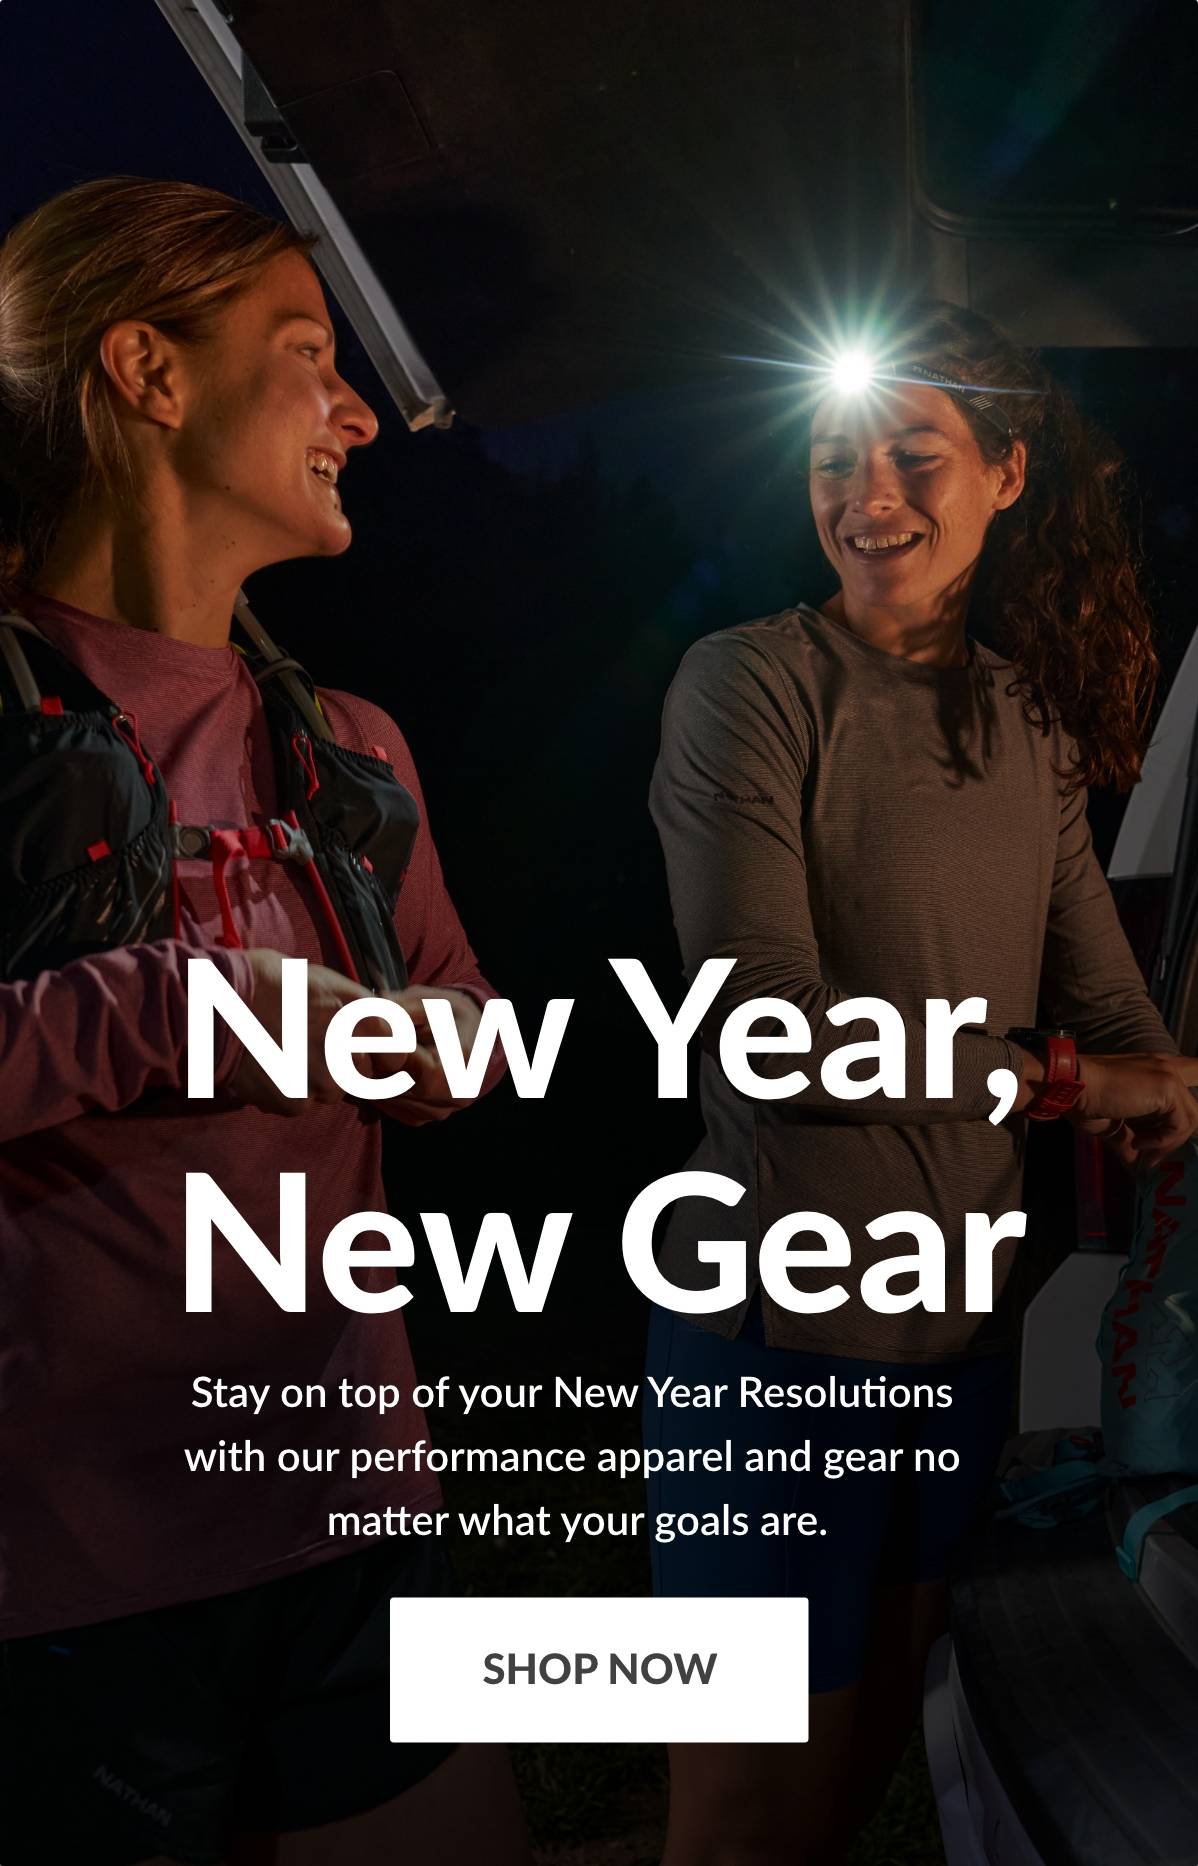 New Year, New Gear. Stay on top of your New Year Resolutions with our performance apparel and gear no matter what your goals are. Shop Now.